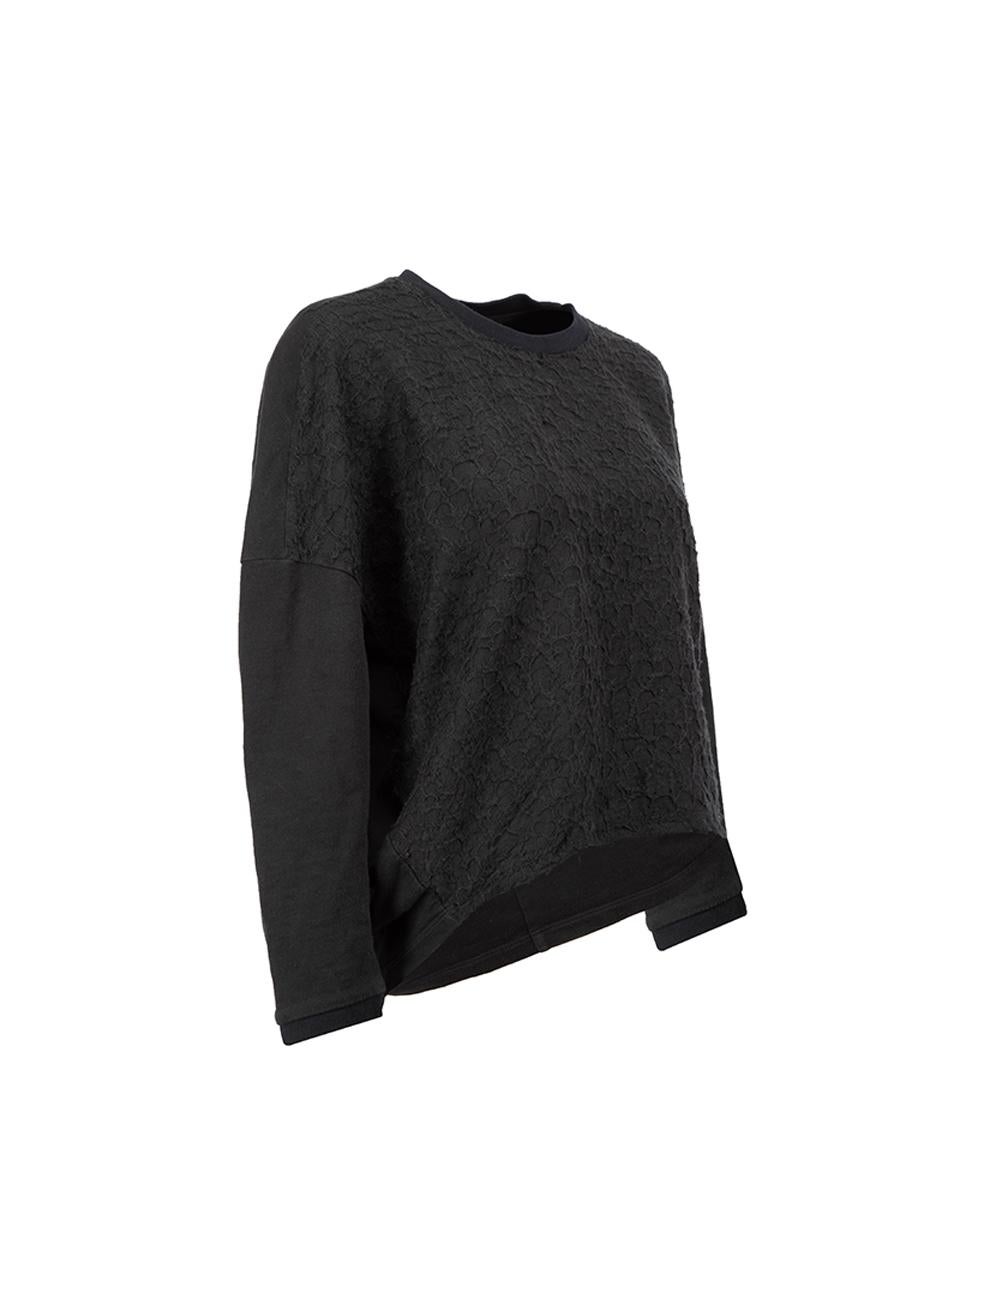 CONDITION is Very good. Minimal wear to jumper is evident. Minimal wear to the texture of the front due to nature of the fabric on this used Giambattista Valli designer resale item. 



Details


Black 

Wool

Long sleeved